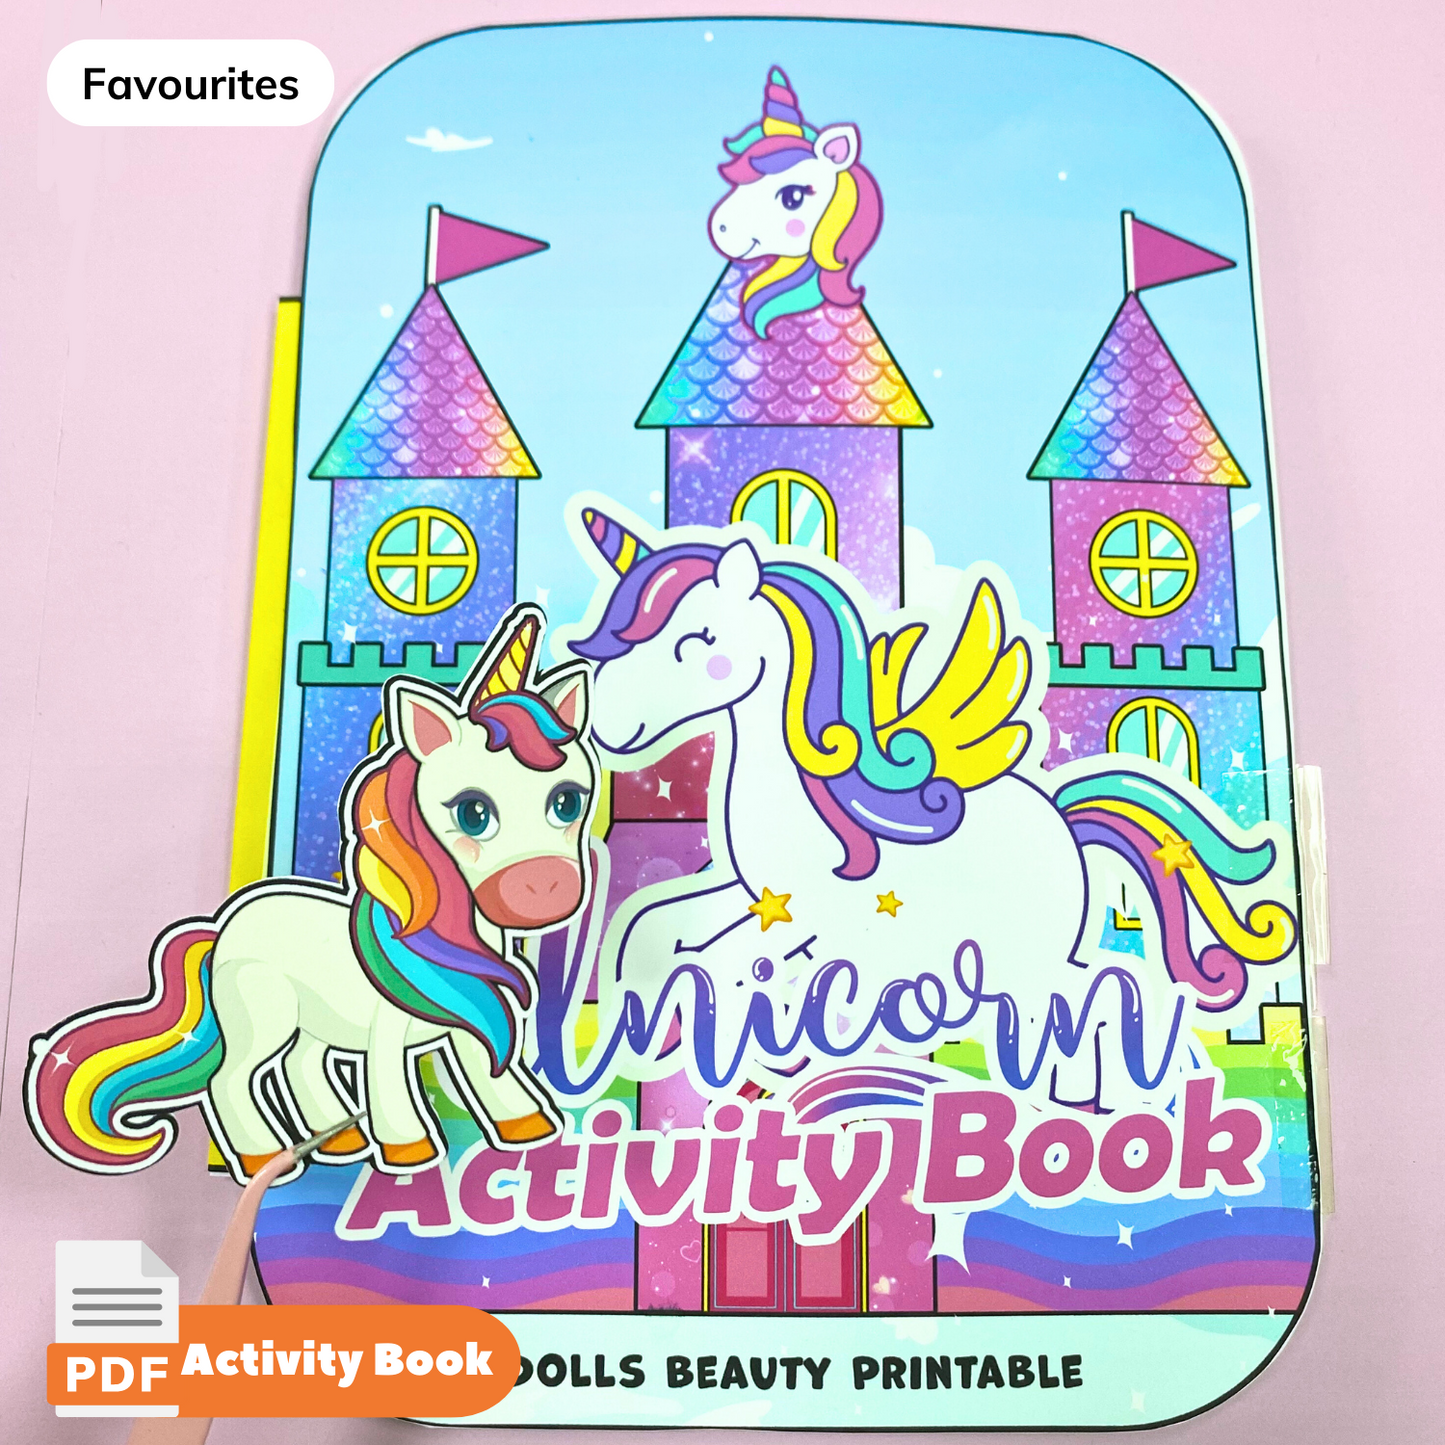 Printable Dollhouse - Unicorn Activity Book Printable | Paper Crafts for Kids | Paper Doll House | Girl Activity Book 🌈 Woa Doll Crafts